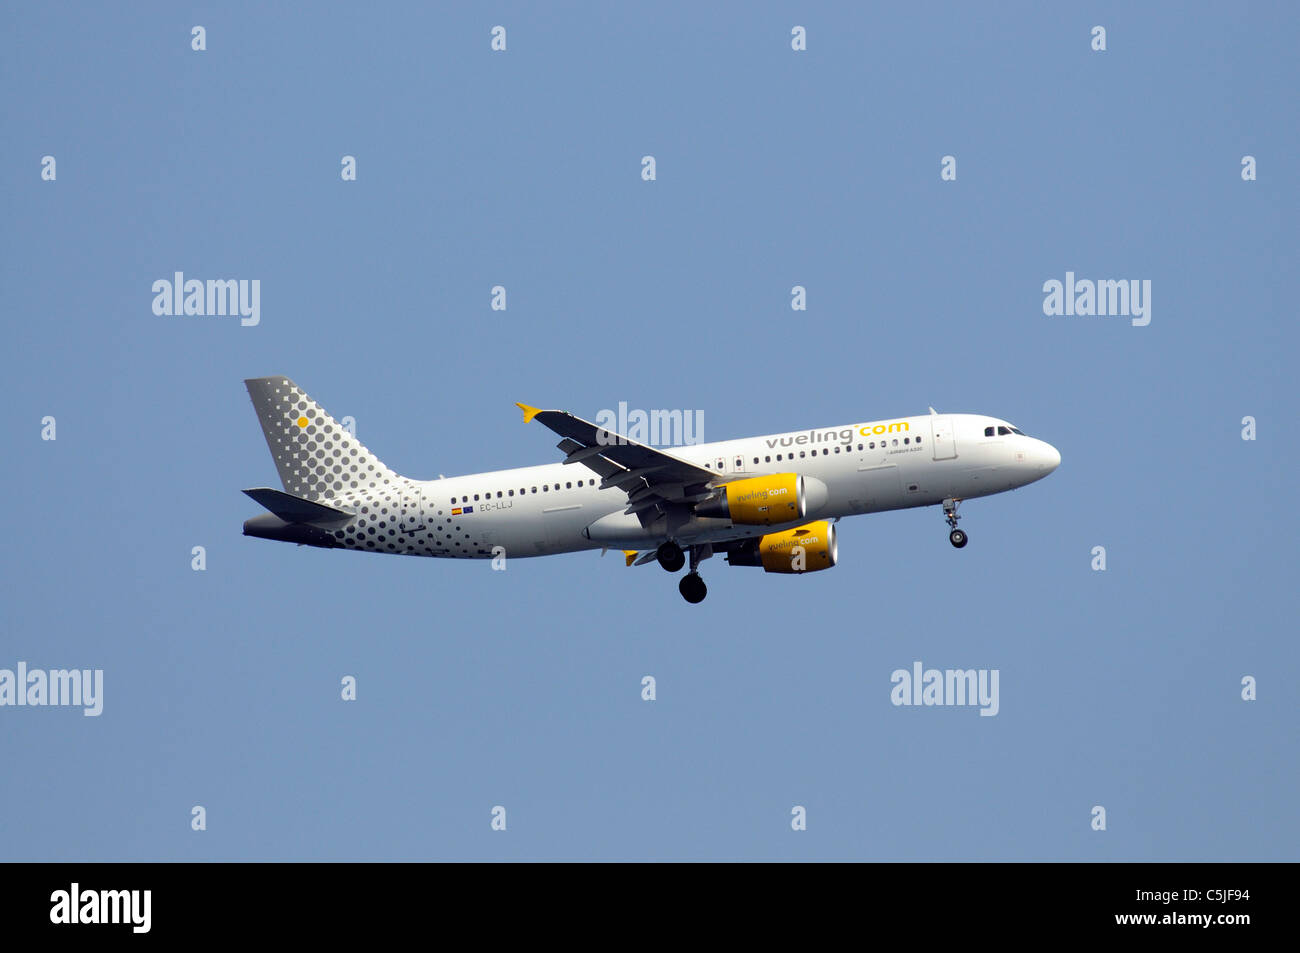 AIRBUS A 320 aircraft of Vueling airline company on final approach to land at Ibiza Airport. EC-LLJ Stock Photo